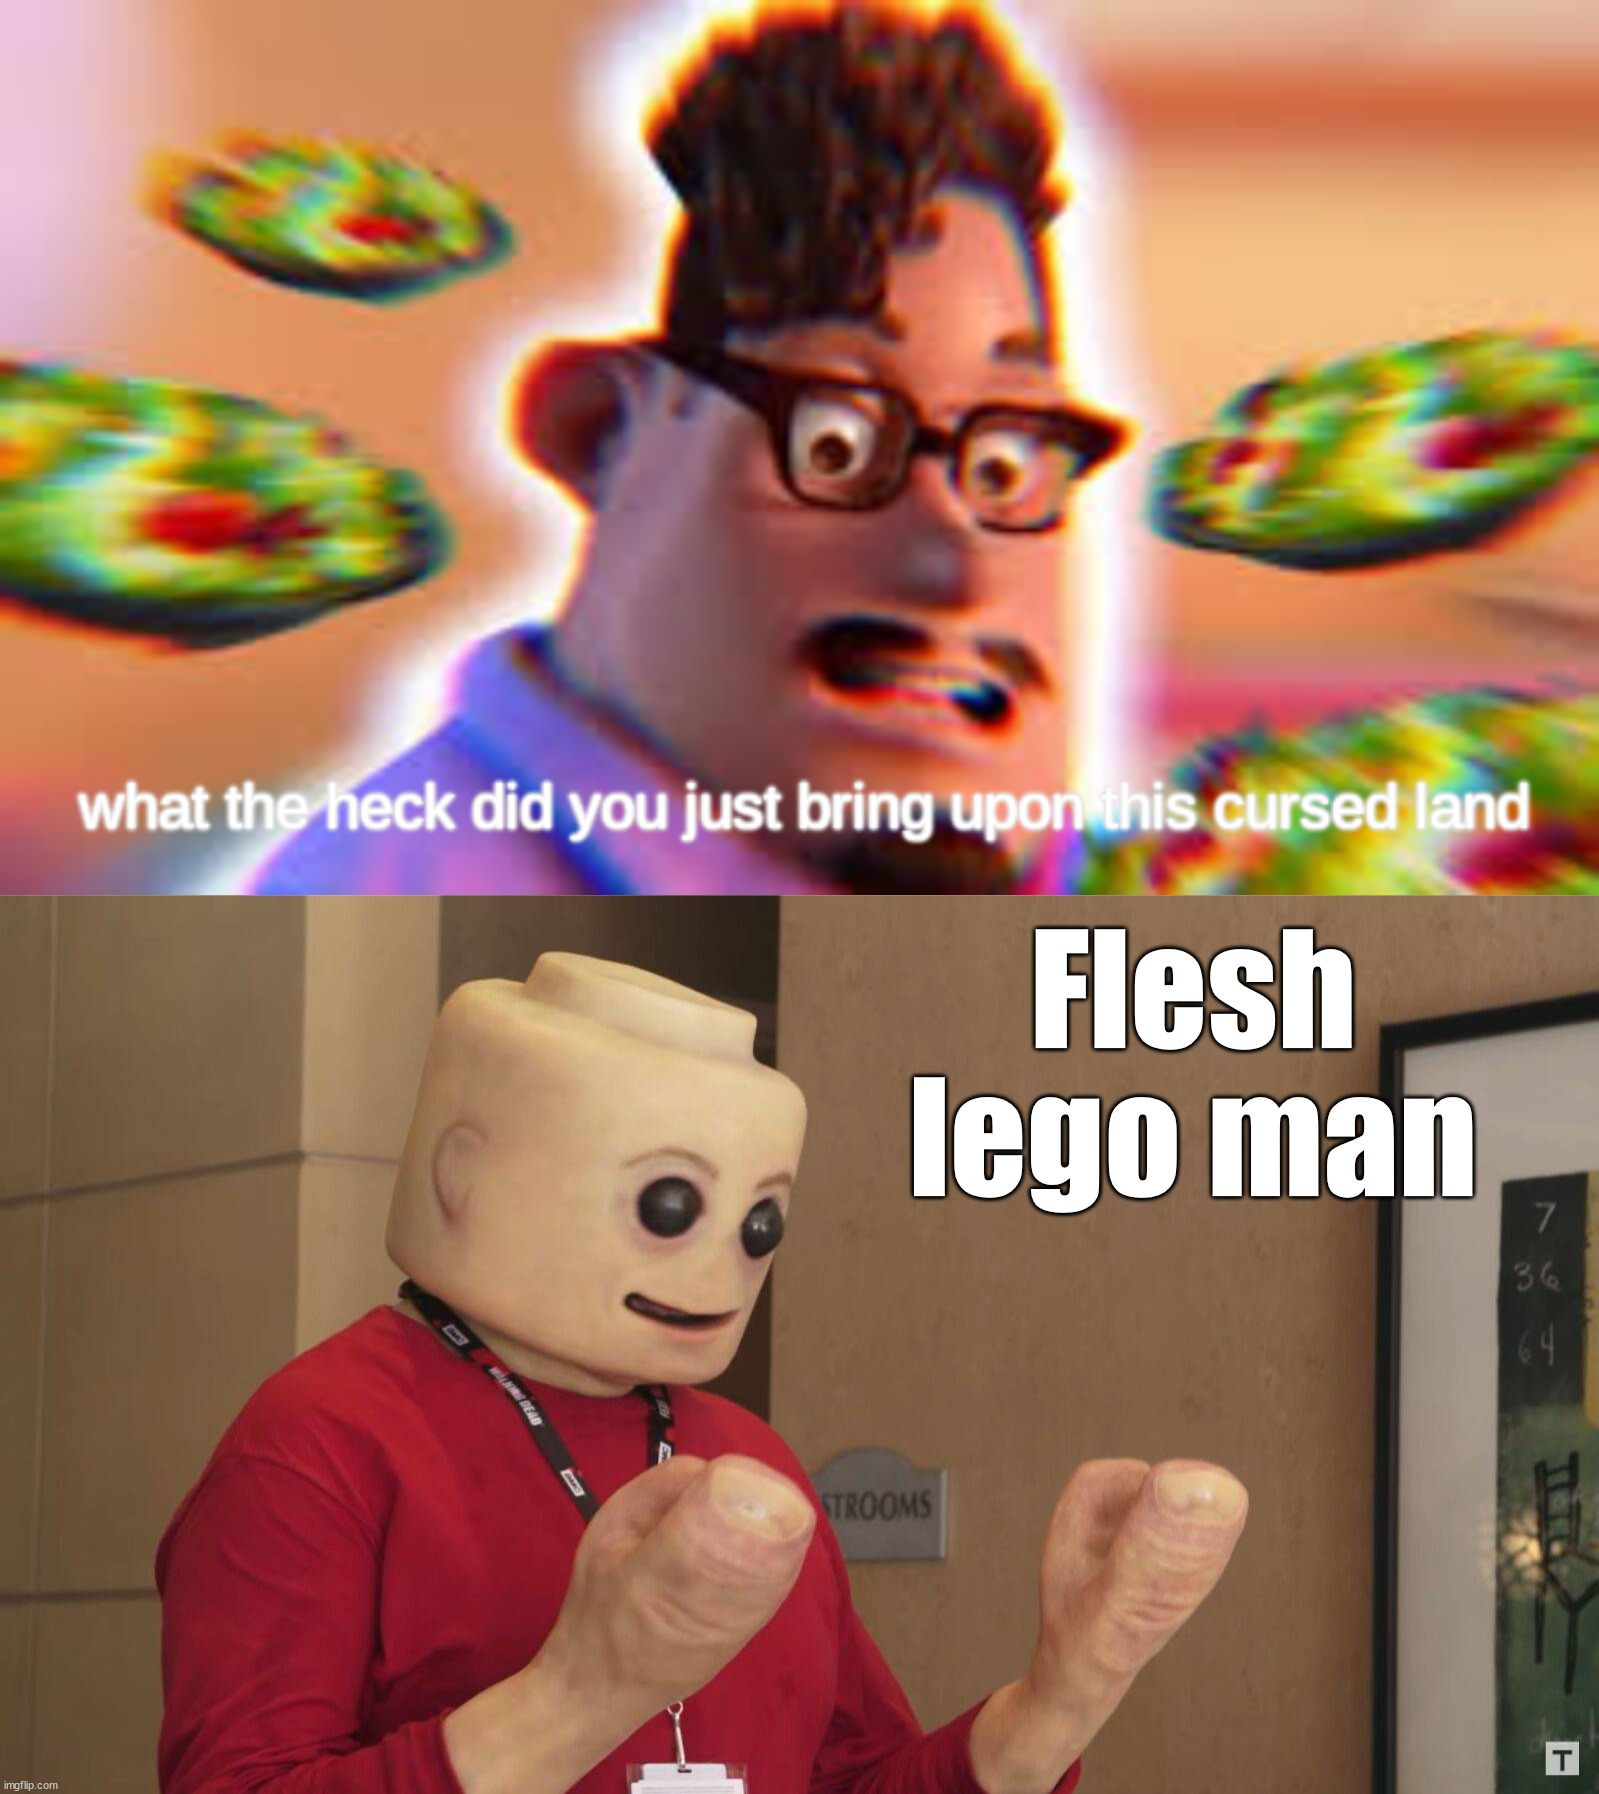 Flesh lego man | image tagged in what the heck did you just bring upon this cursed land,cursed image | made w/ Imgflip meme maker